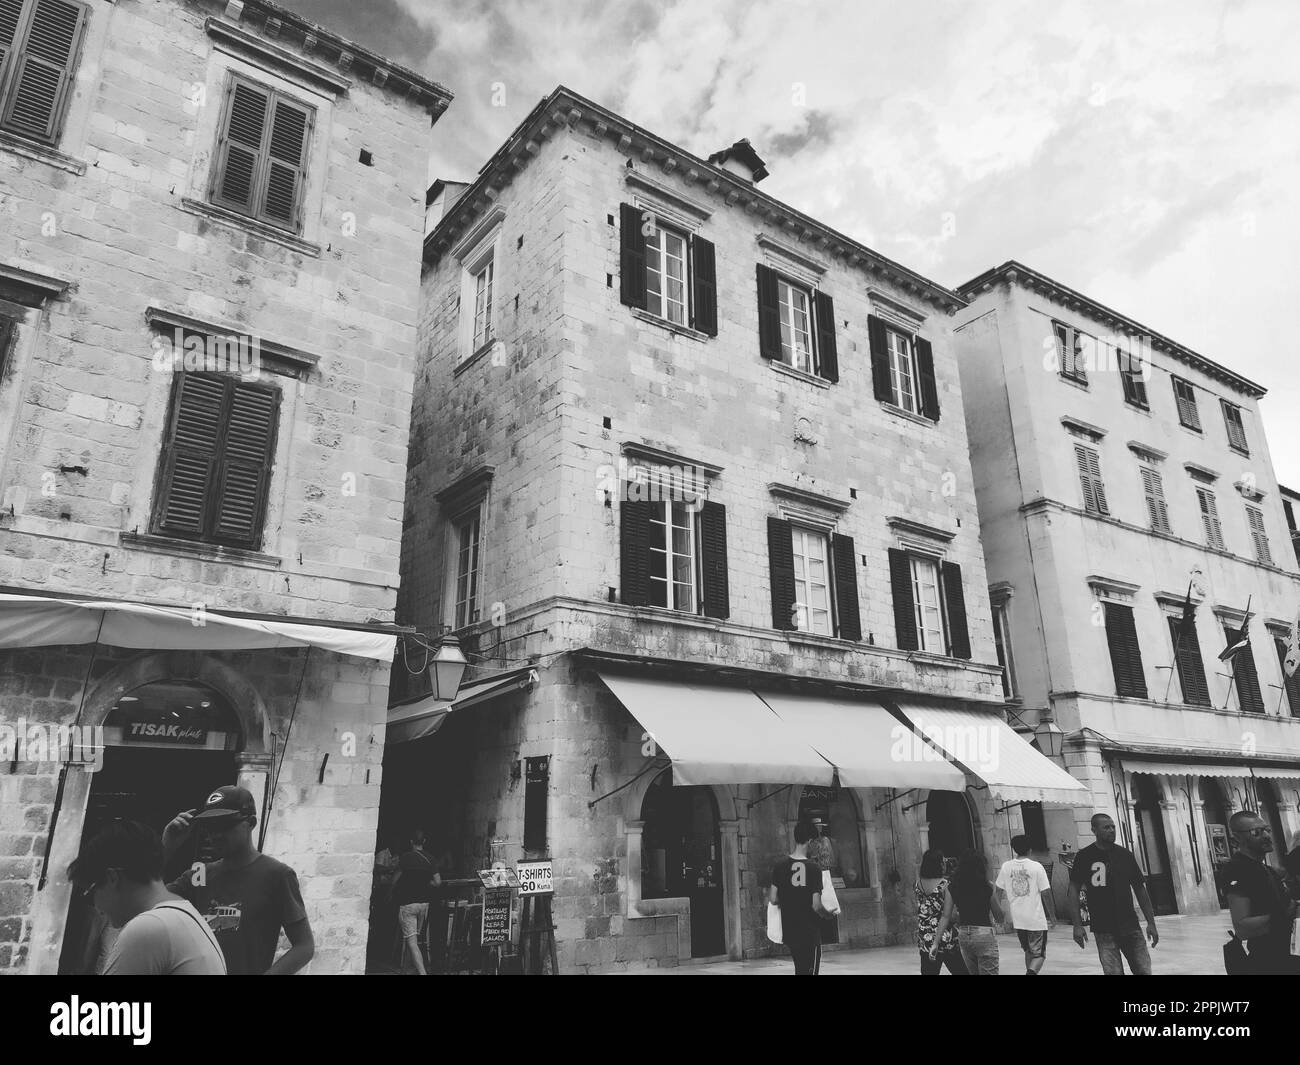 Stradun, Stradone is the main street of the historic city center of Dubrovnik in Croatia. architectural sights. A popular place for tourist walks. People are walking August 14, 2022 Black and white Stock Photo